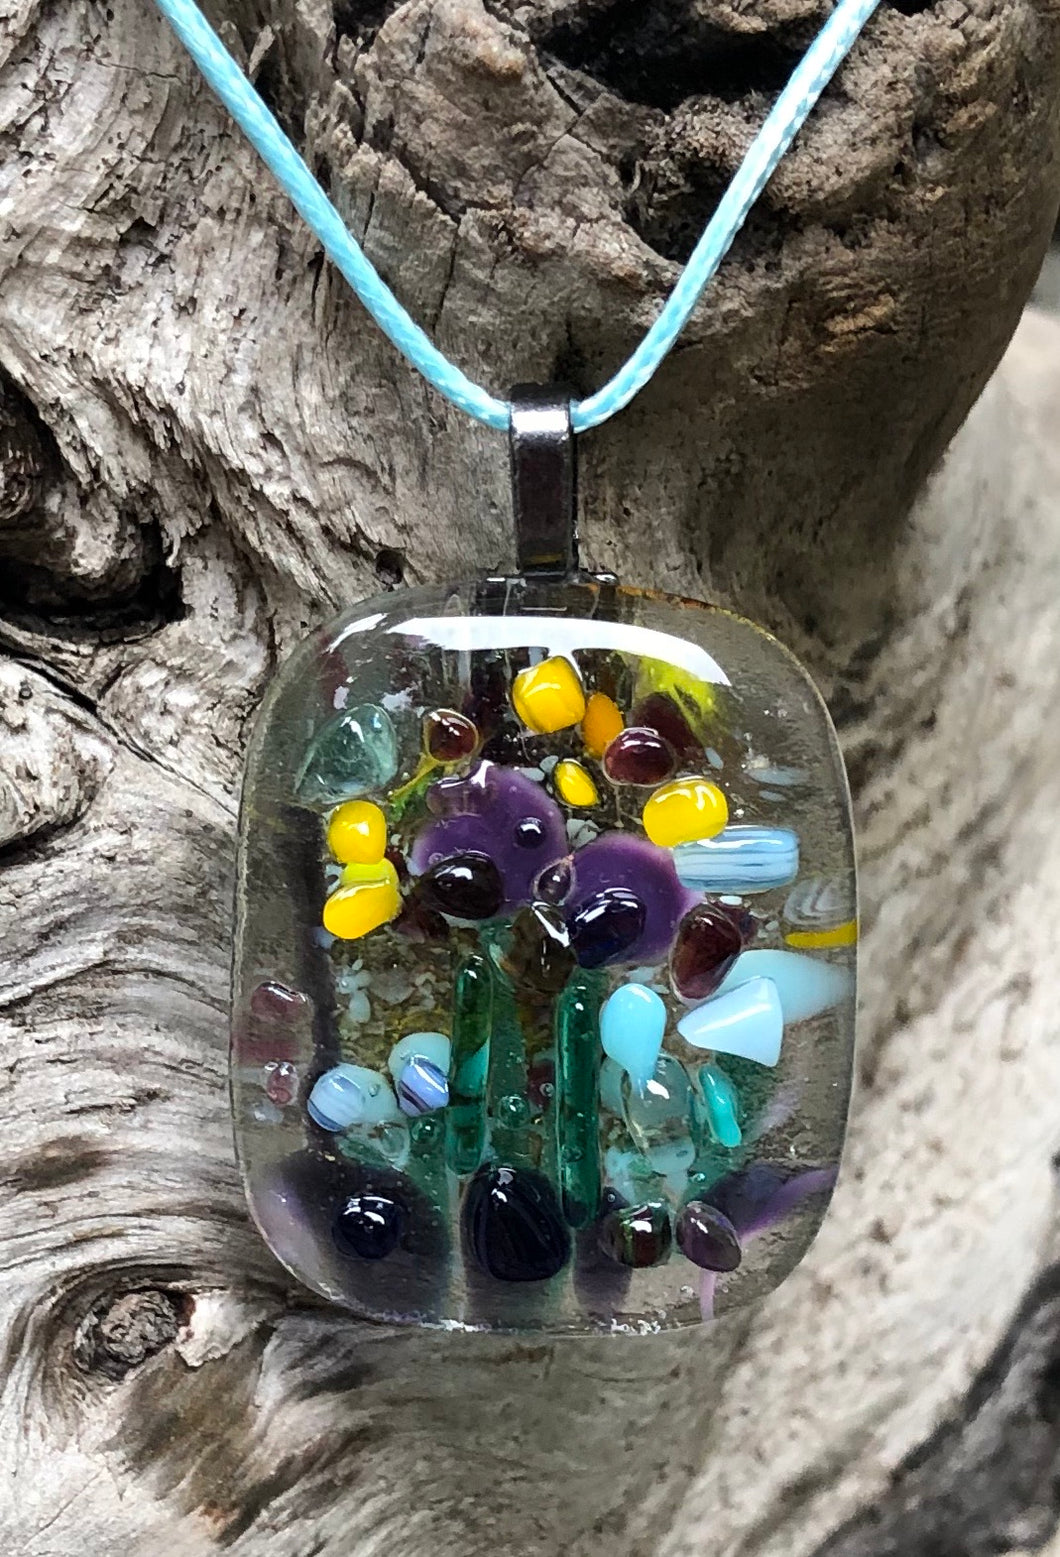 So much activity on this fused glass pendant, could be pollinators, butterflies, birds... this pendant with Purples, Aquas, Yellows and Greens measures 1 5/8” by 1 3/8”. The light blue waxed Irish cotton cord is adjustable from 17 3/4” to 19 3/4”.